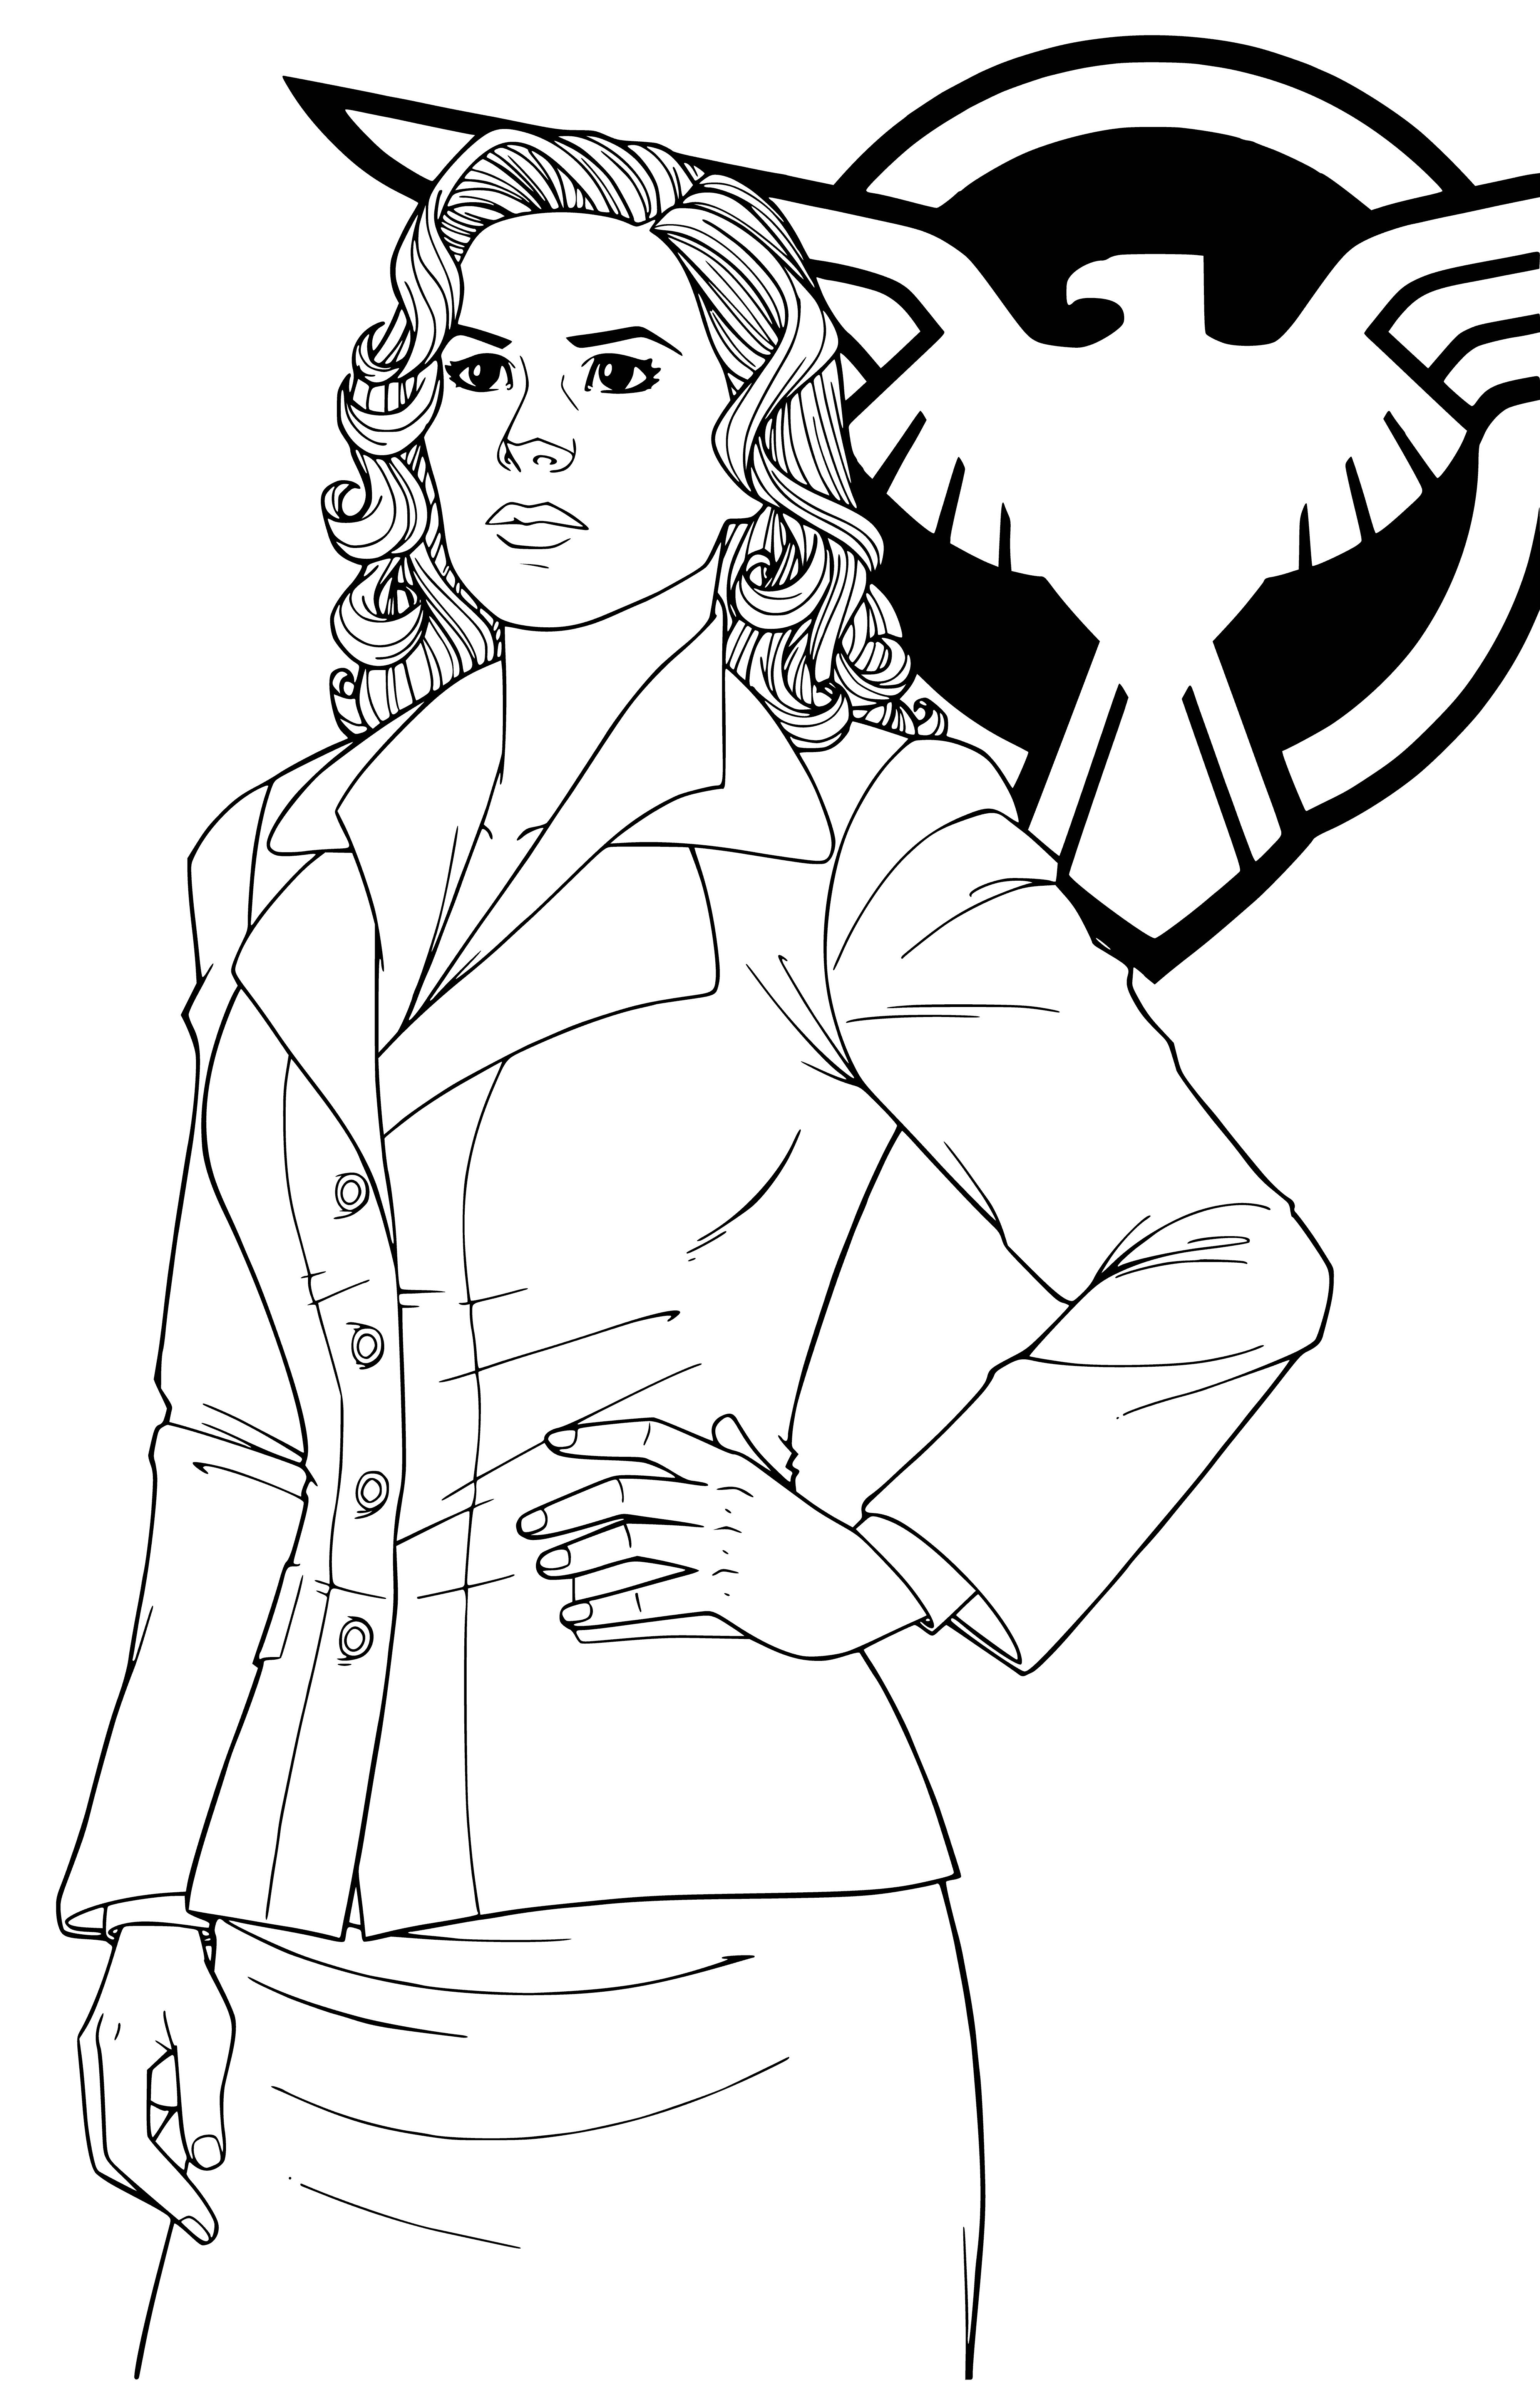 coloring page: Peggy Carter is an undercover agent, ready to fight crime with a gun and shield. #ShesGotThis